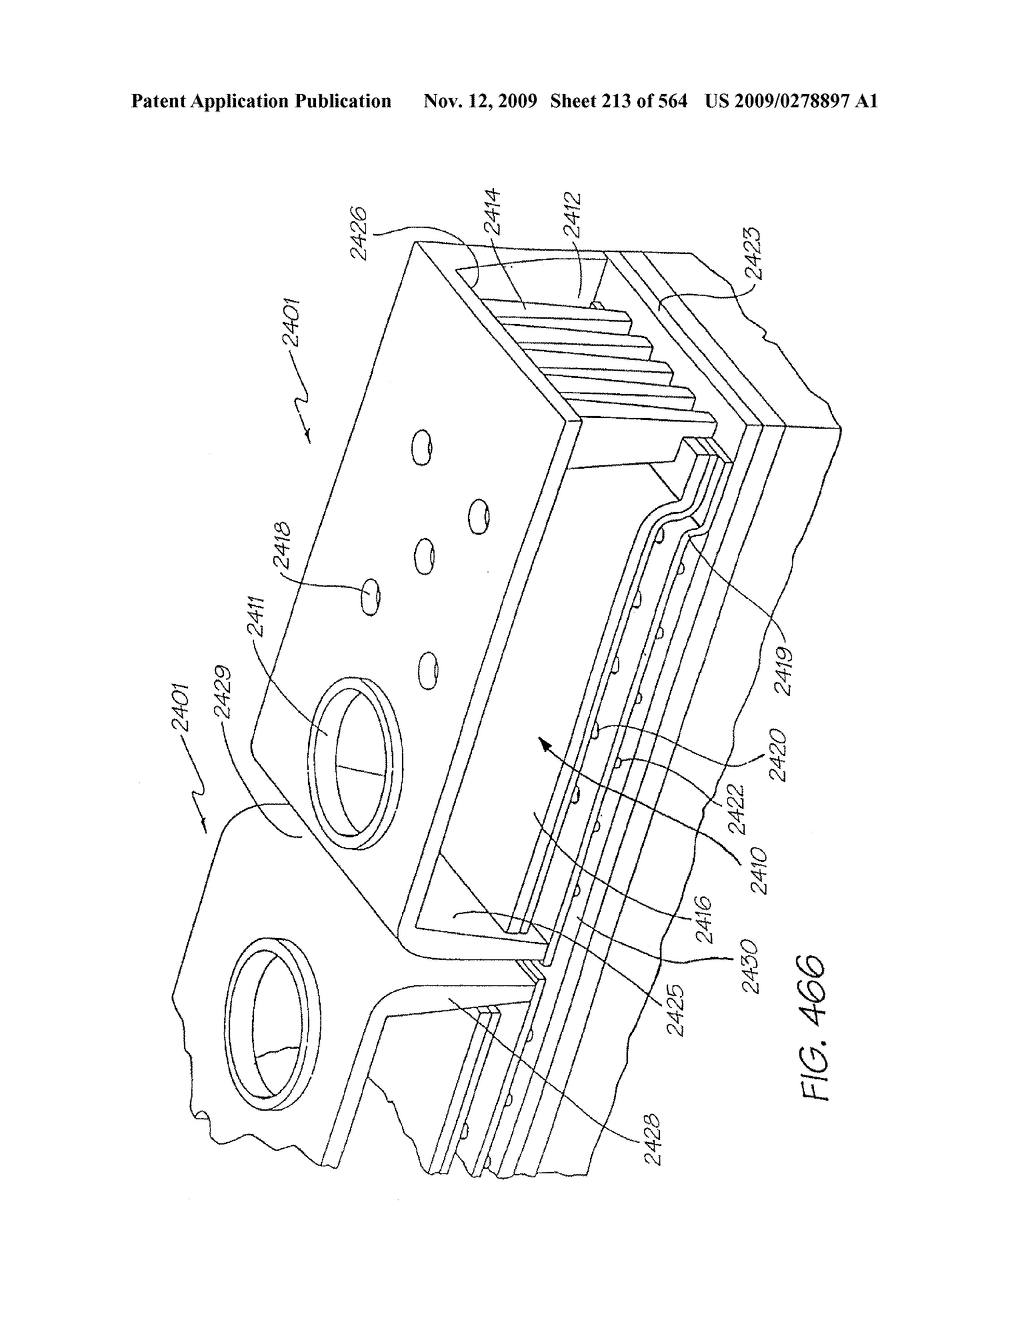 Inkjet Printhead With Nozzle Chambers Each Holding Two Fluids - diagram, schematic, and image 214